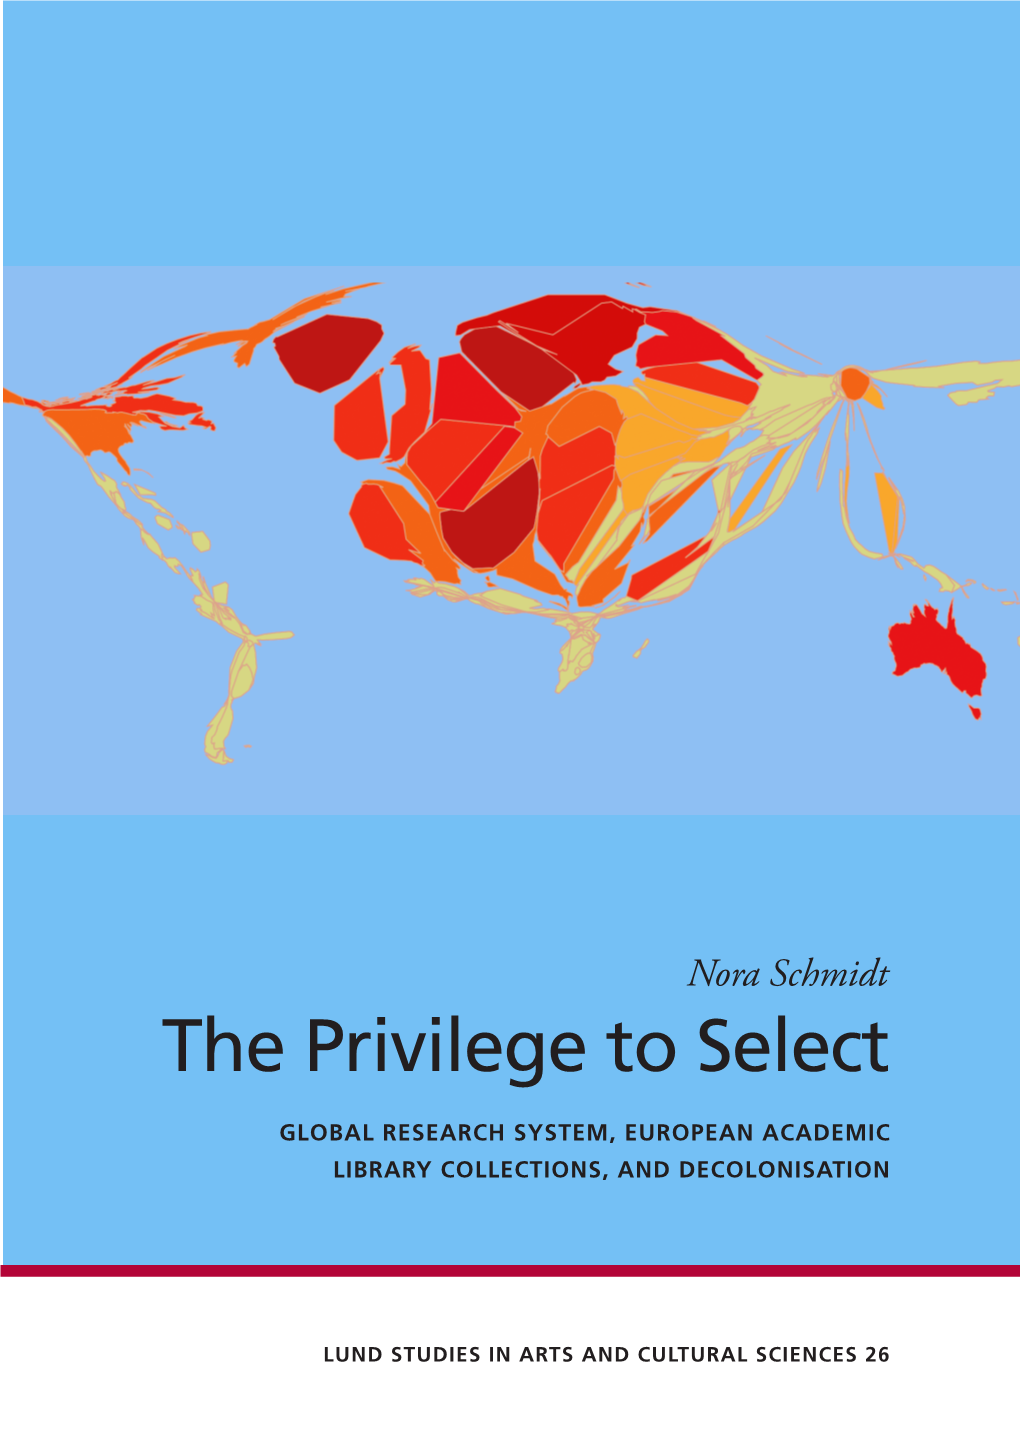 The Privilege to Select. Global Research System, European Academic Library Collections, and Decolonisation